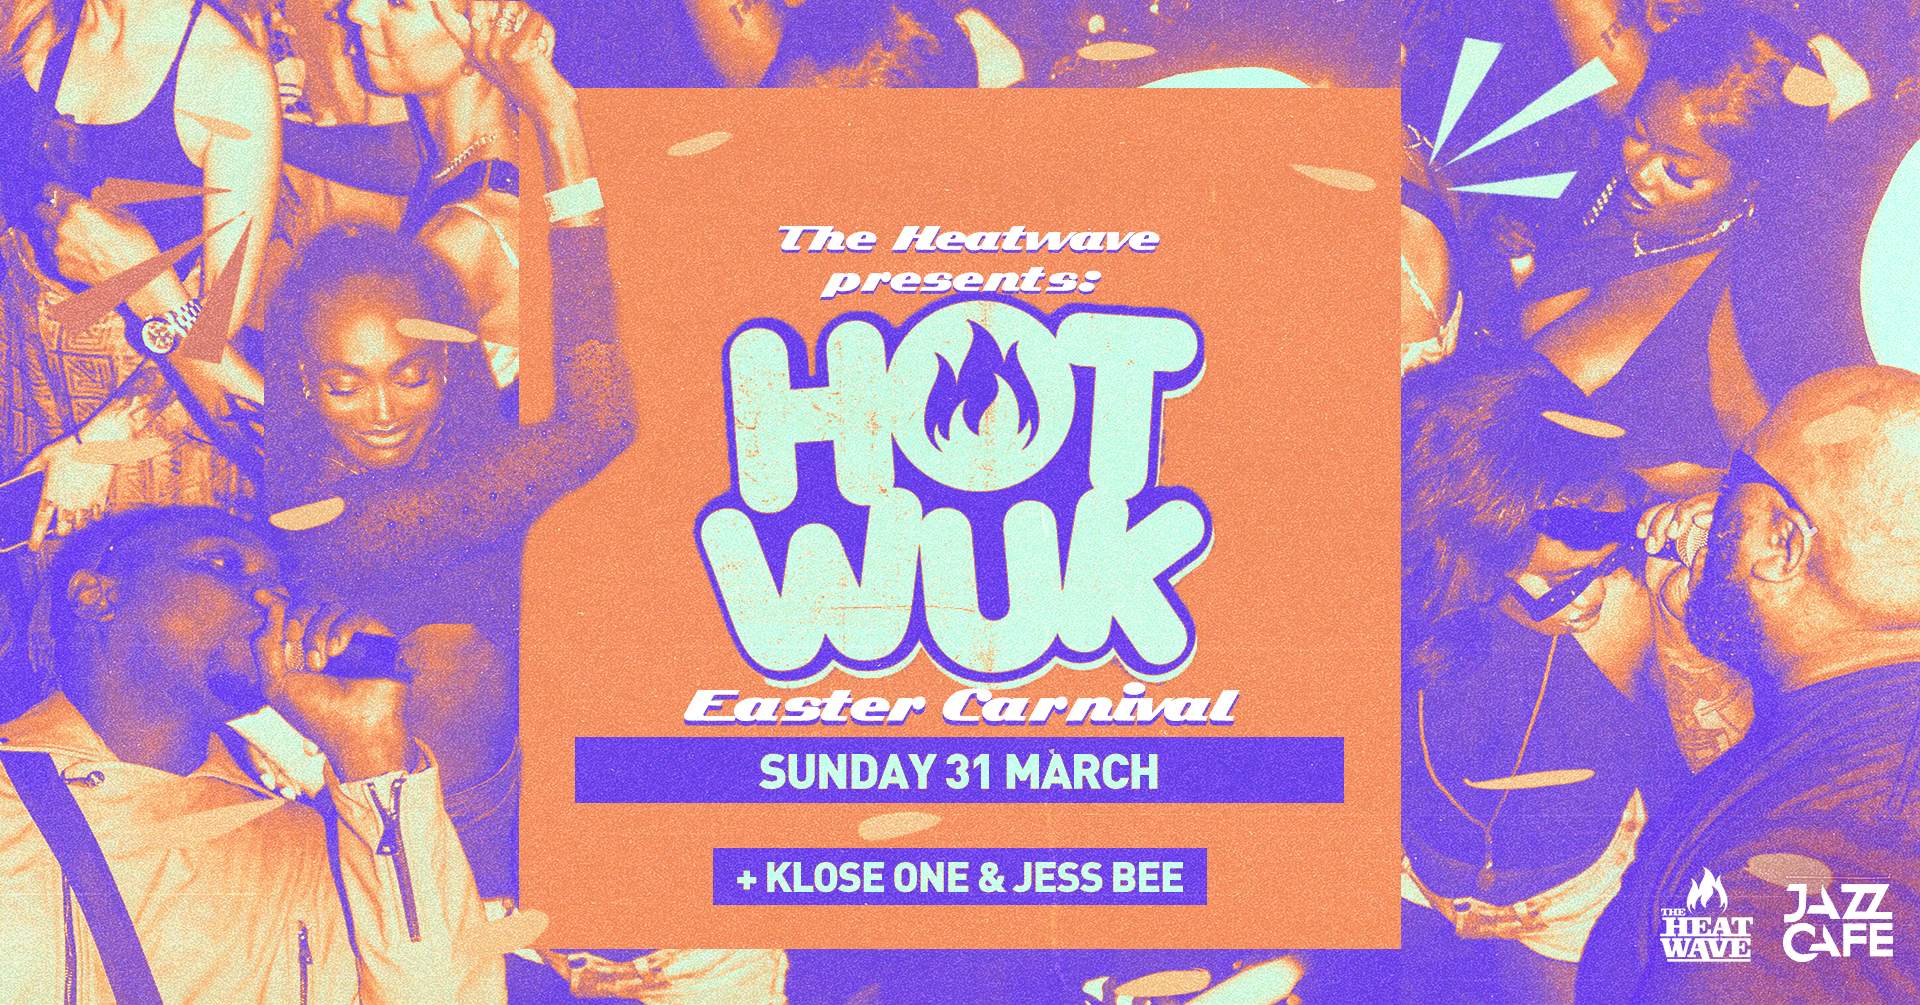 Dancehall vs Afrobeats: Easter Sunday Carnival with Hot Wuk - フライヤー裏